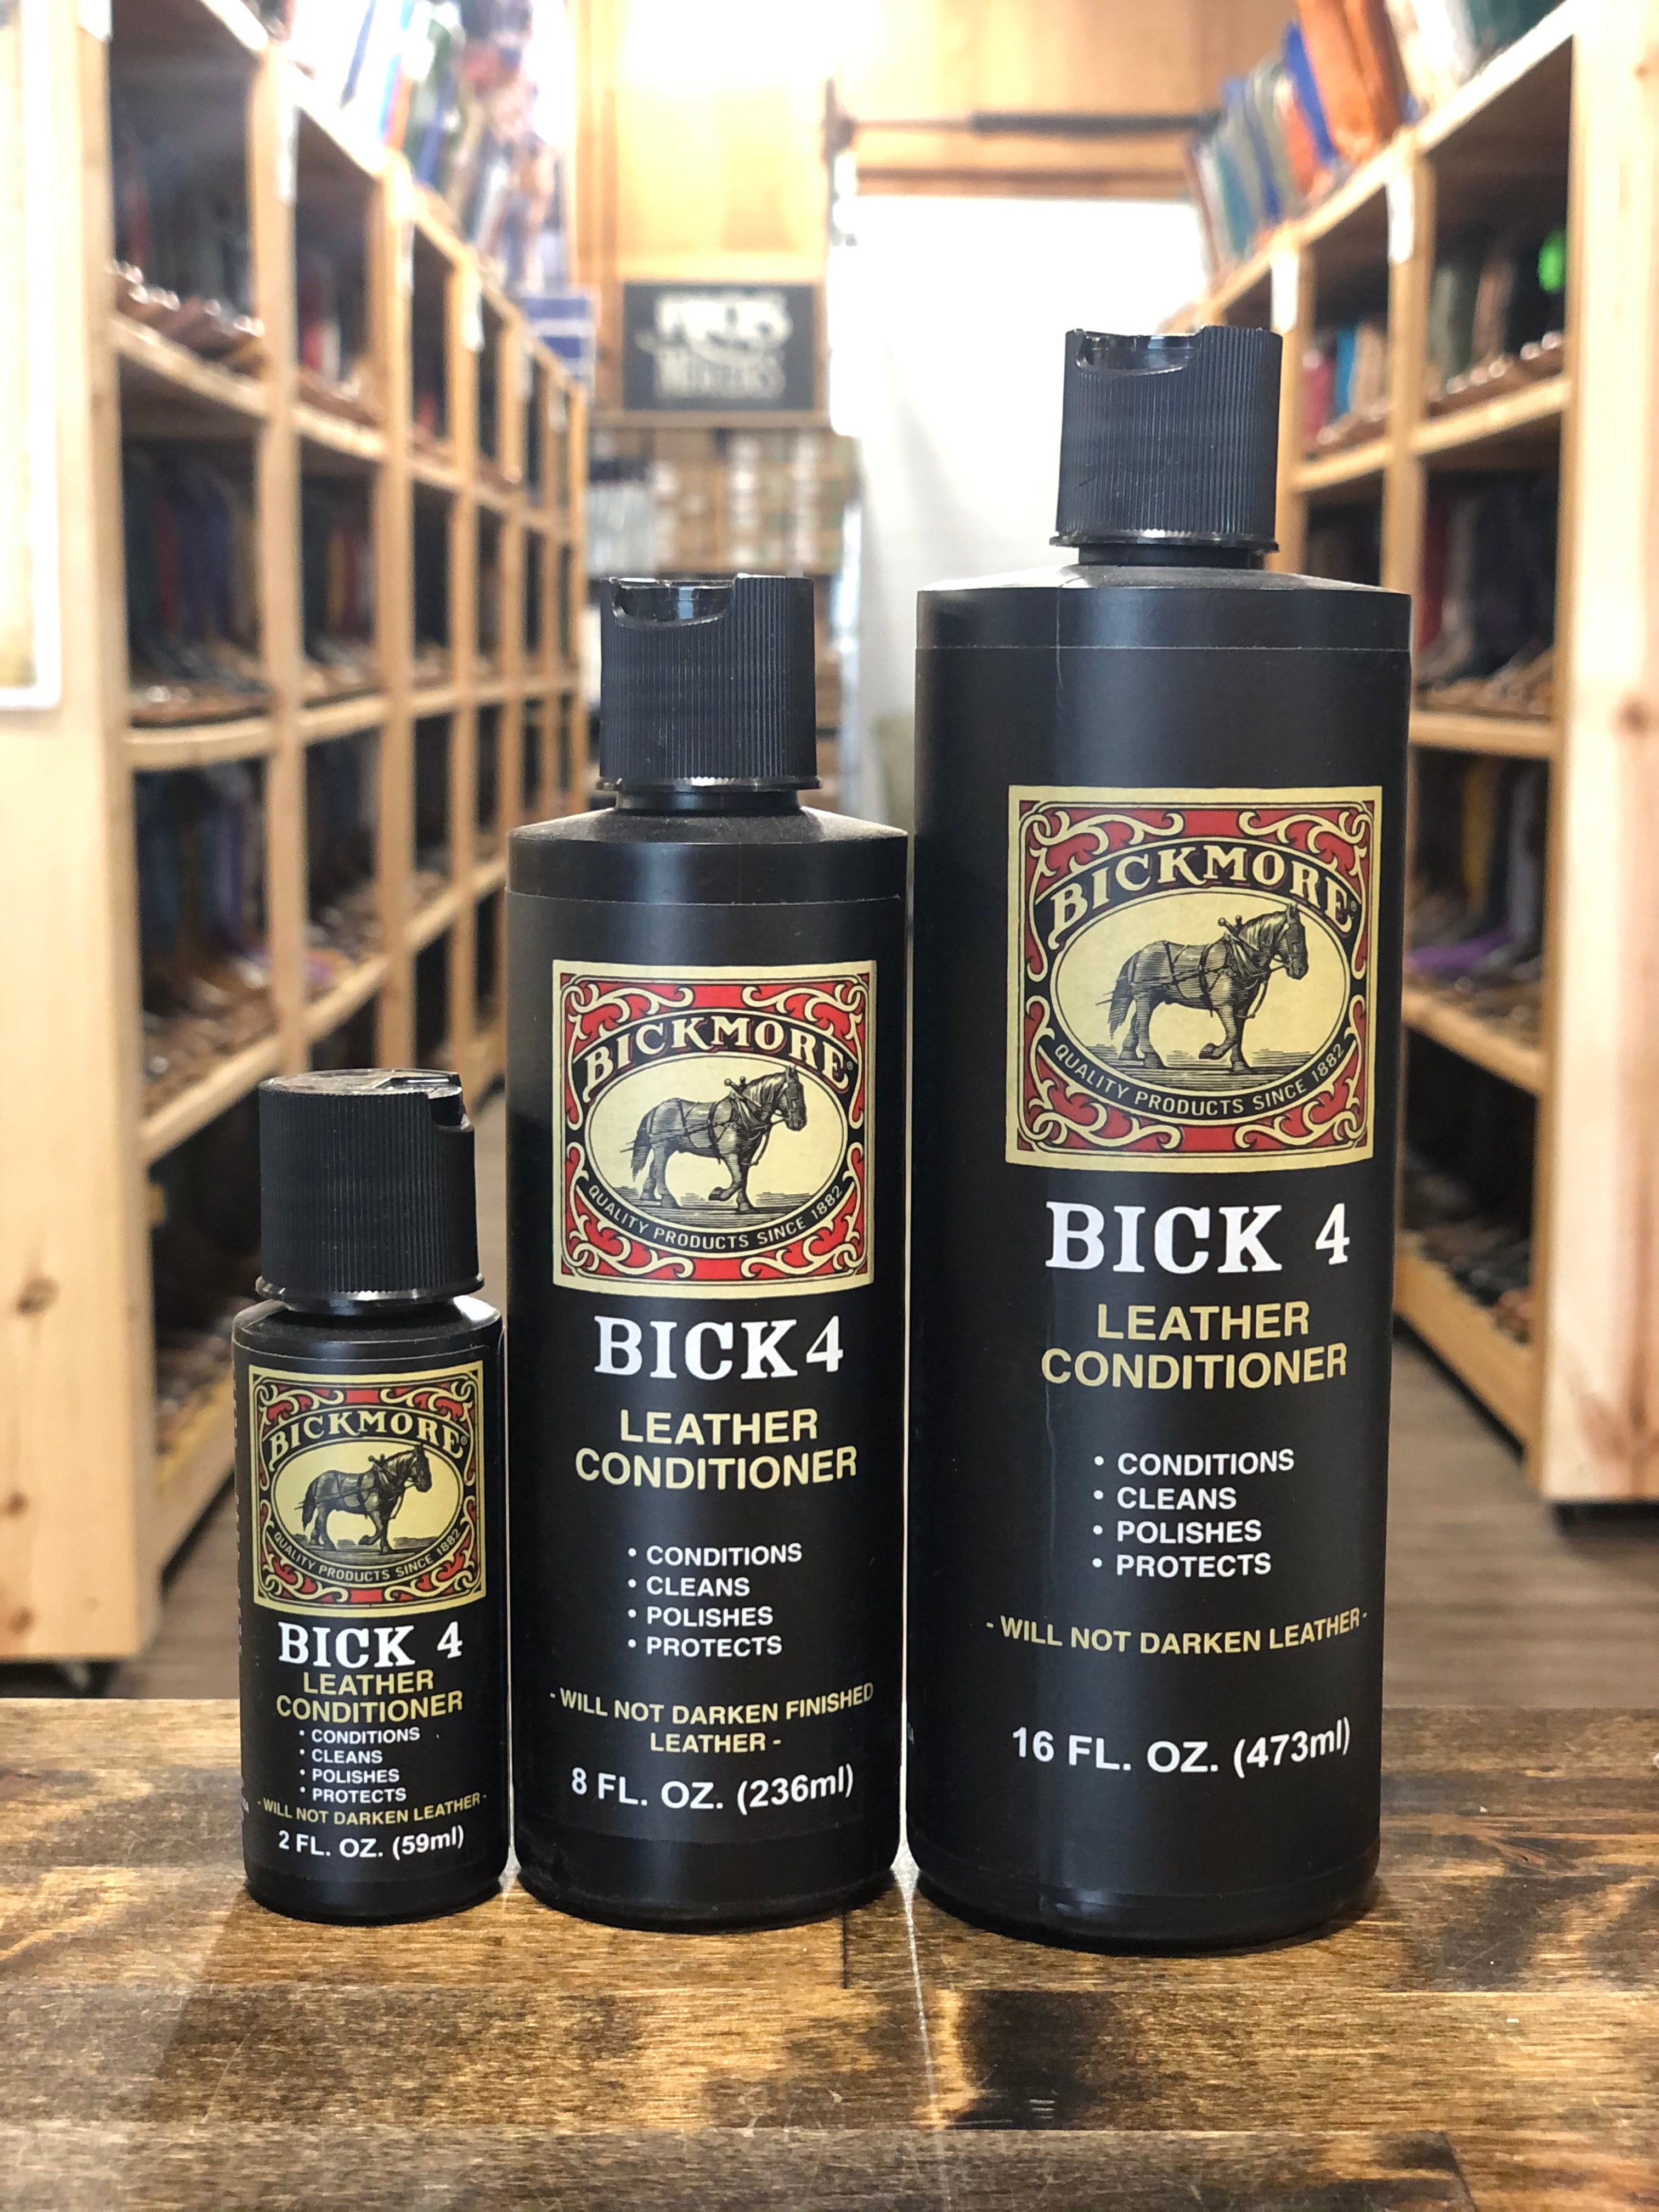  Bickmore Bick 4 Leather Conditioner 16 Fl Oz - Best Since 1882  - Cleaner & Conditioner - Restore Polish & Protect All Smooth Finished  Leathers : Automotive